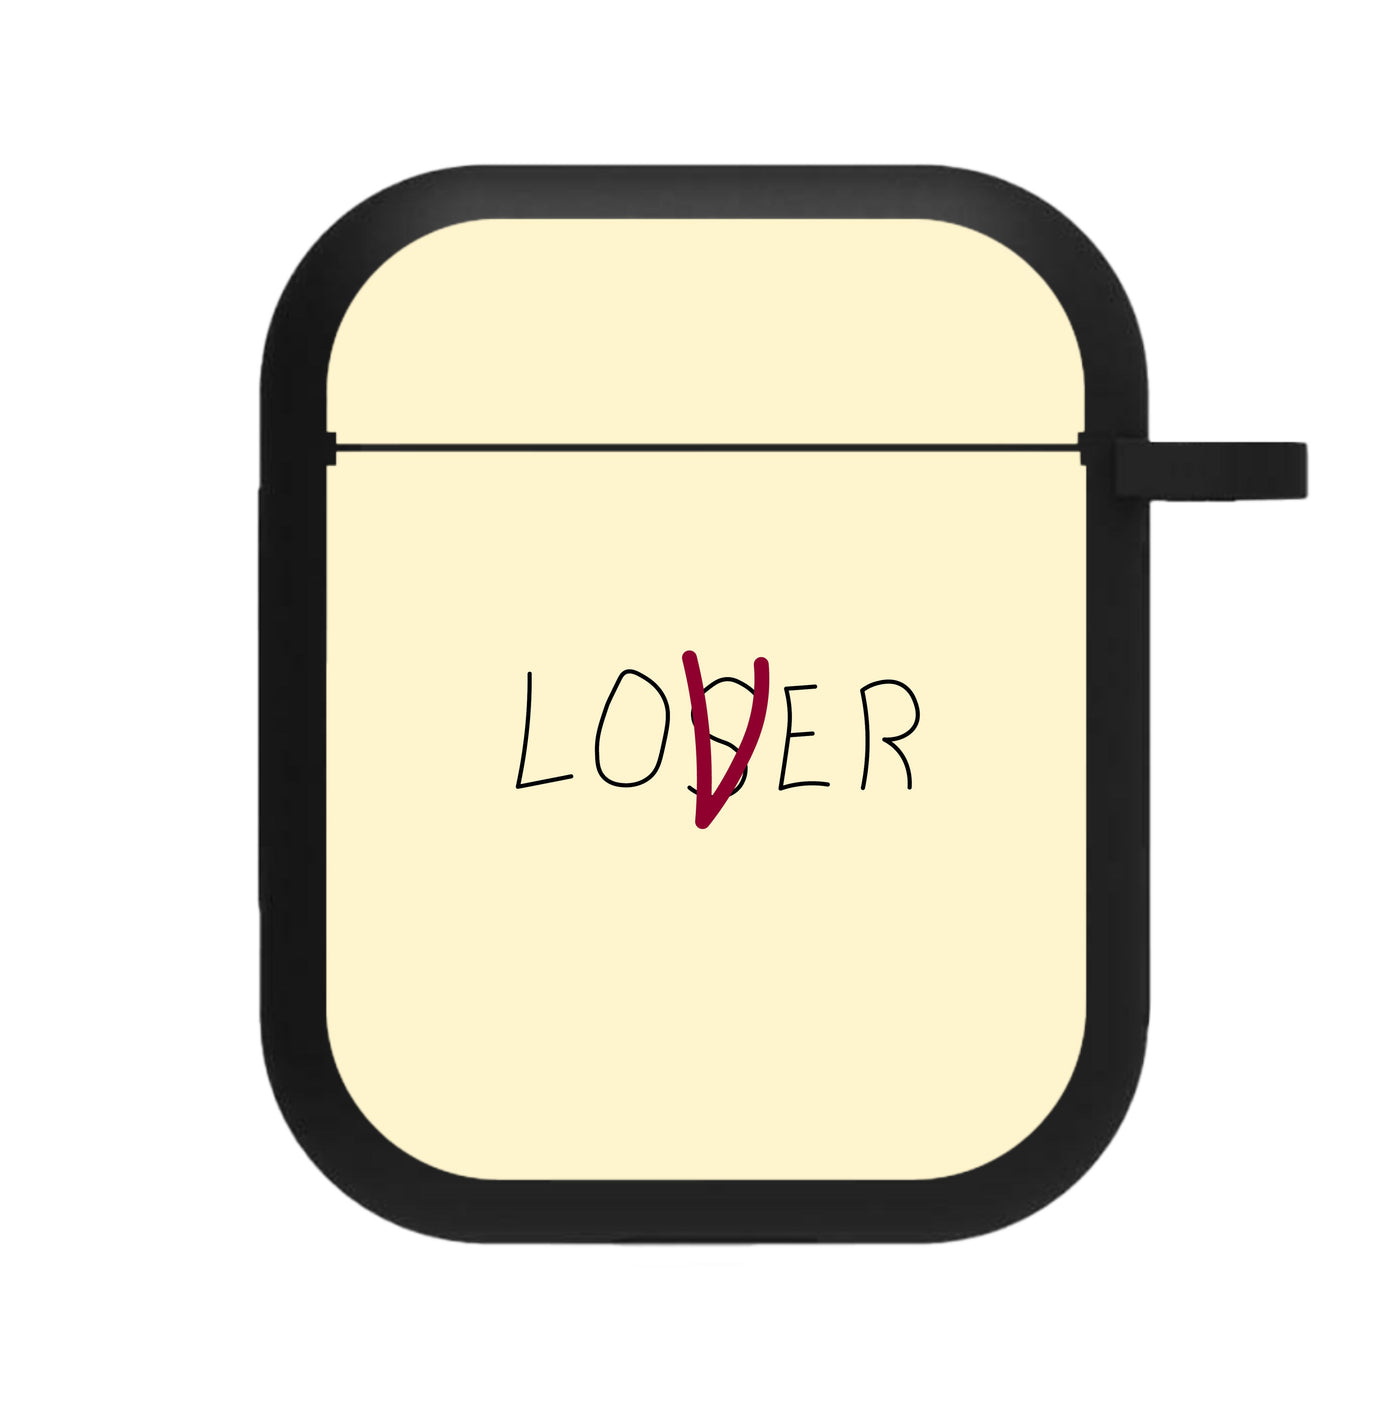 Loser - IT The Clown AirPods Case